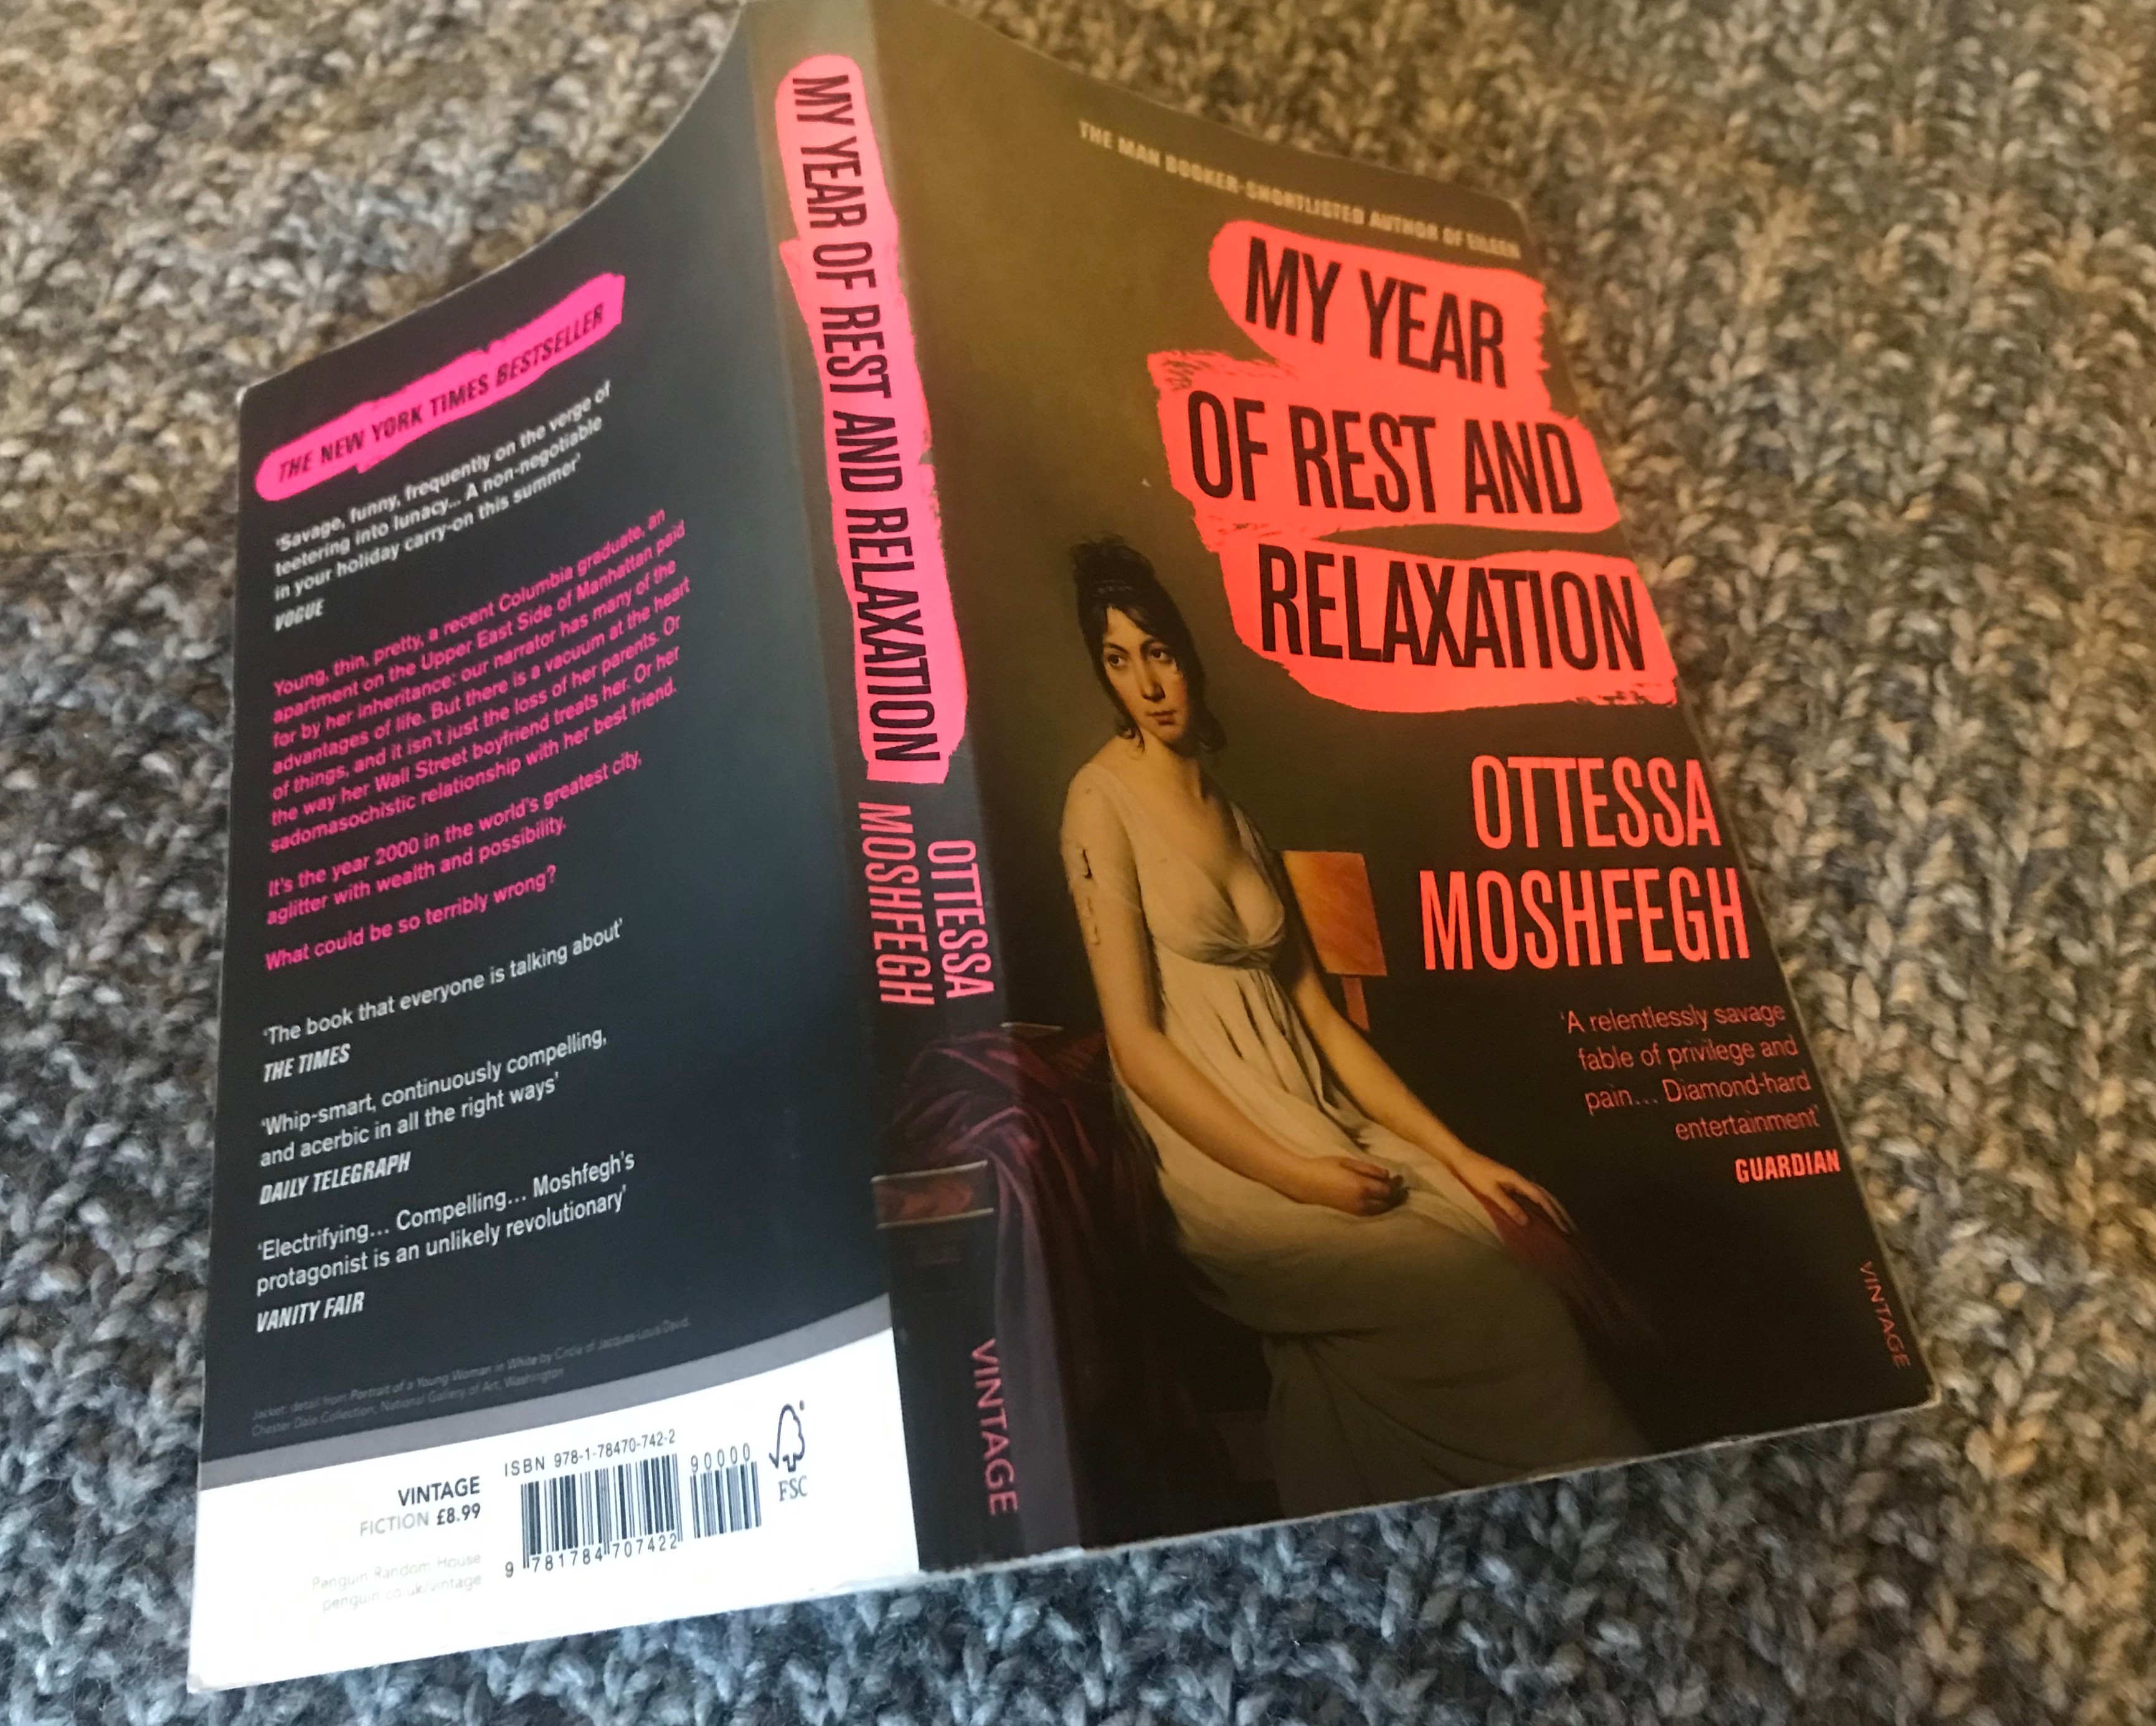 What Happens in 'My Year of Rest and Relaxation' by Ottessa Moshfegh?